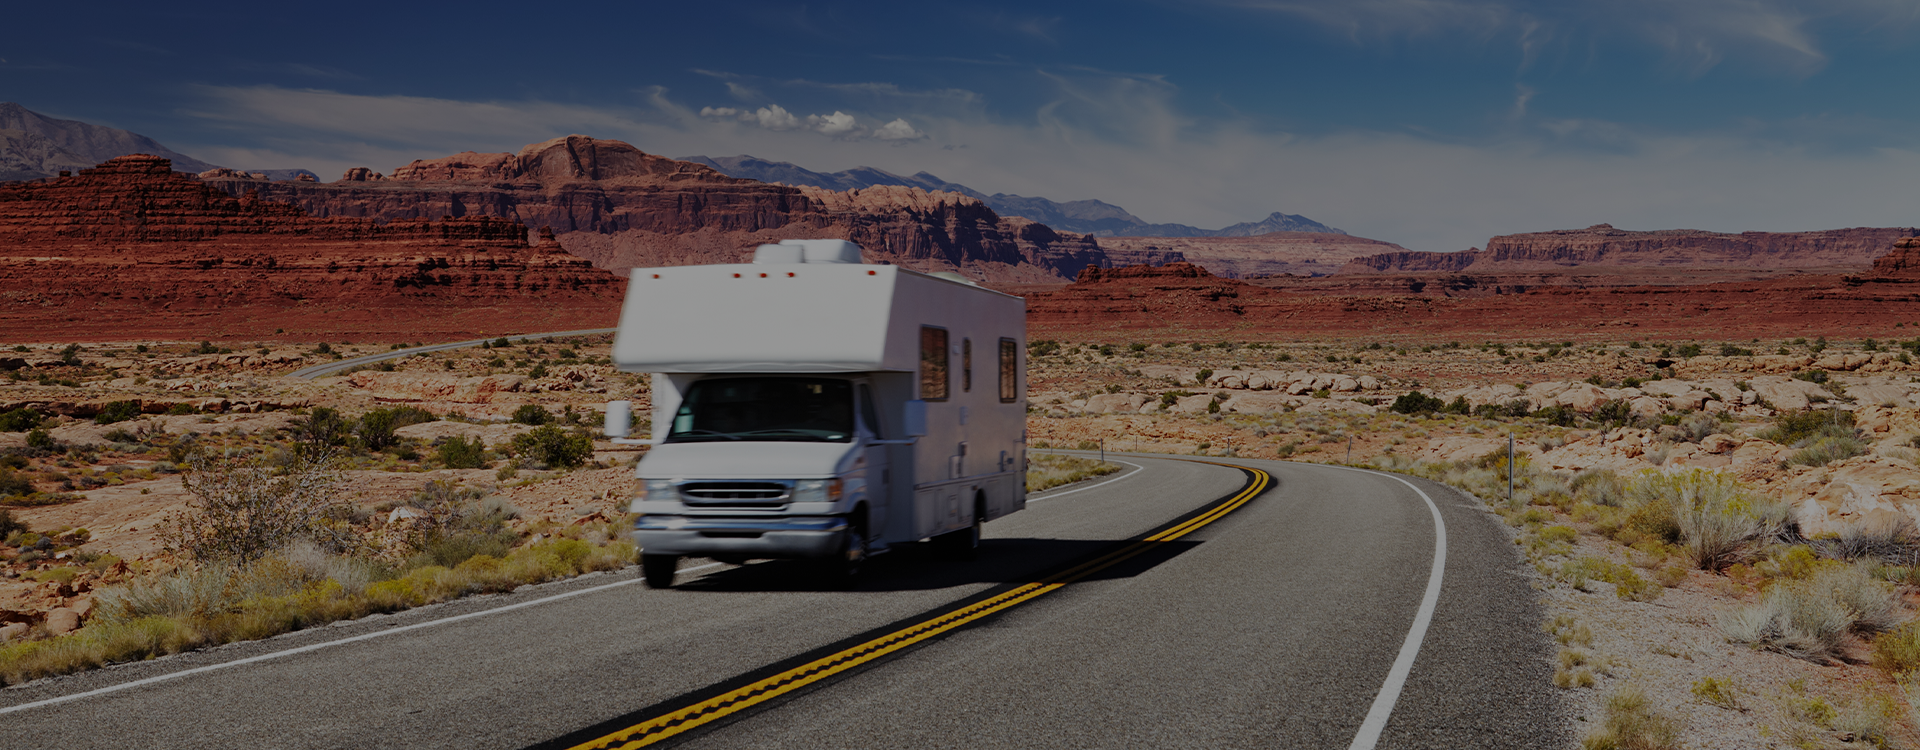 Incorporate National Parks and Other Attractions in RV Marketing